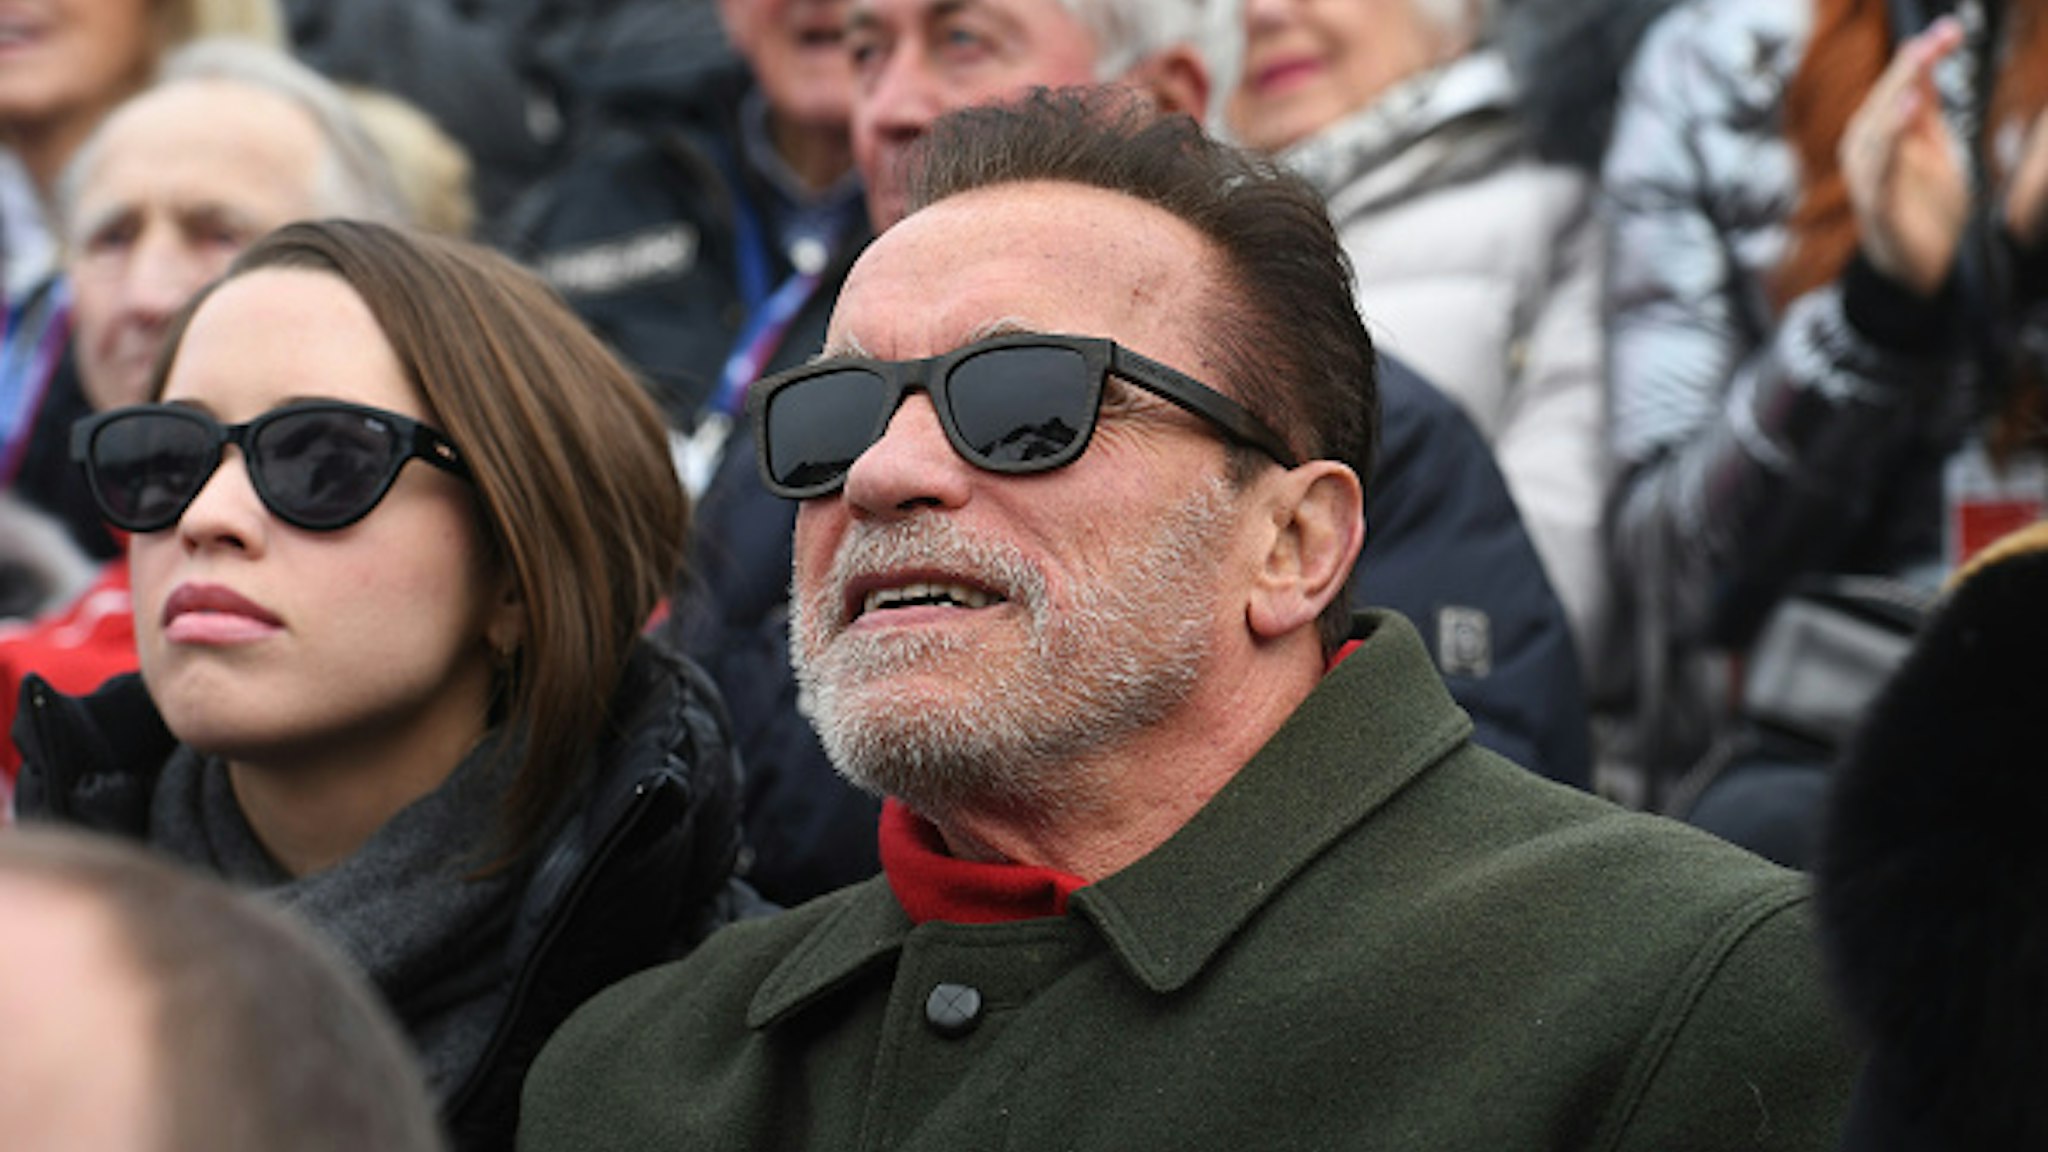 25 January 2020, Austria, Kitzbühel: The actor Arnold Schwarzenegger watches the men's downhill race on the Streif from the VIP tribune in the finish area of the Hahnenkamm race. Photo: Felix Hörhager/dpa - ATTENTION: Only for editorial use in connection with current reporting and only with full mention of the above credit. No advertising.